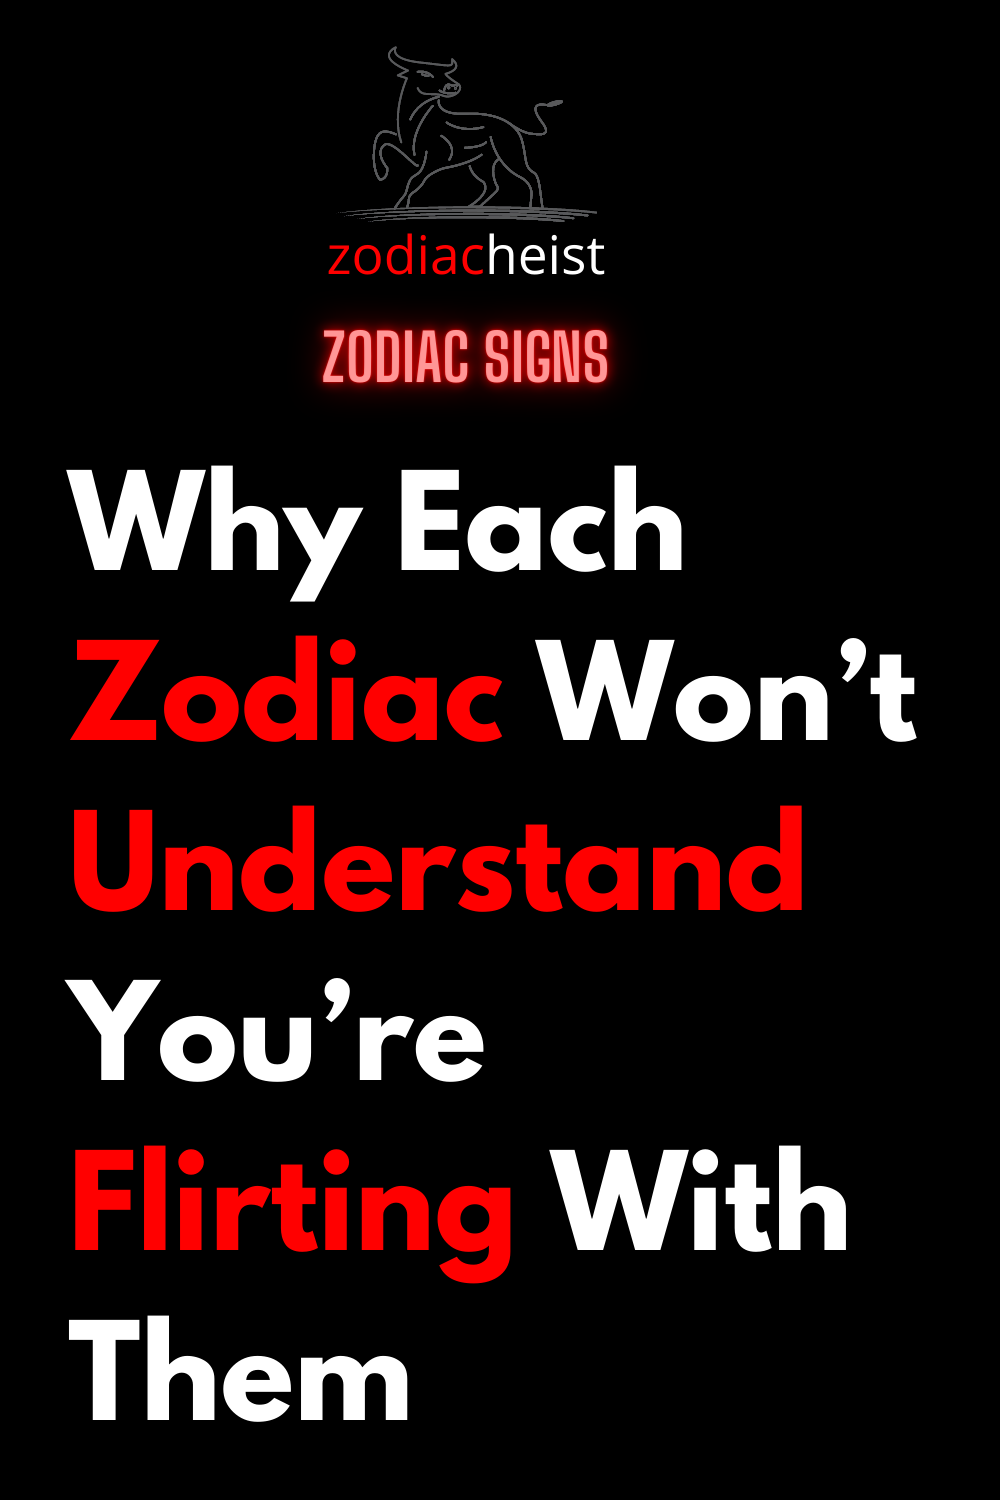 Why Each Zodiac Won’t Understand You’re Flirting With Them